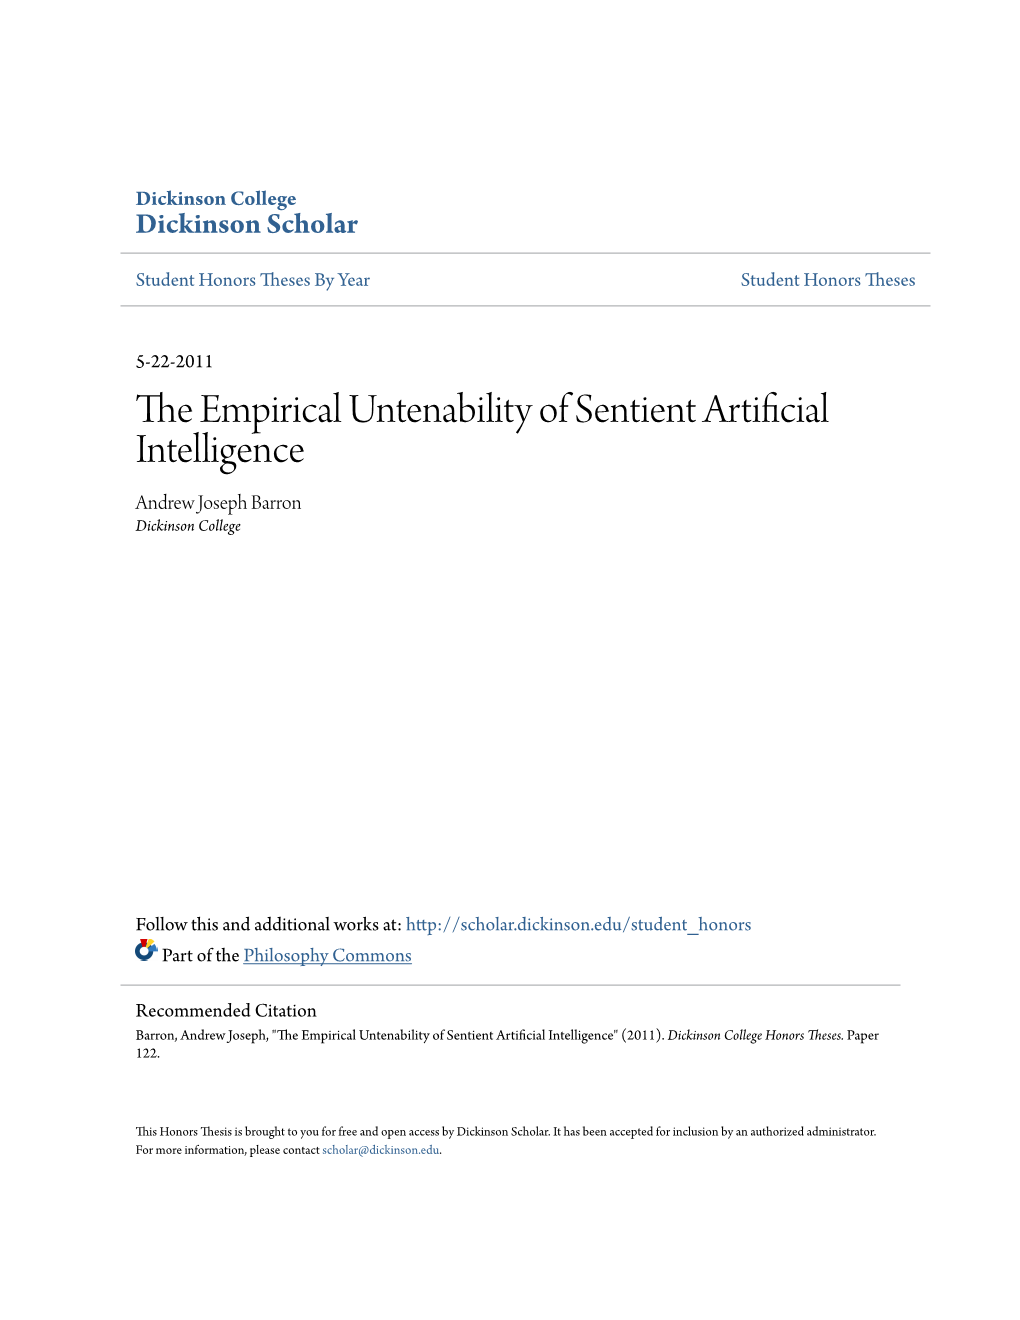 The Empirical Untenability of Sentient Artificial Intelligence